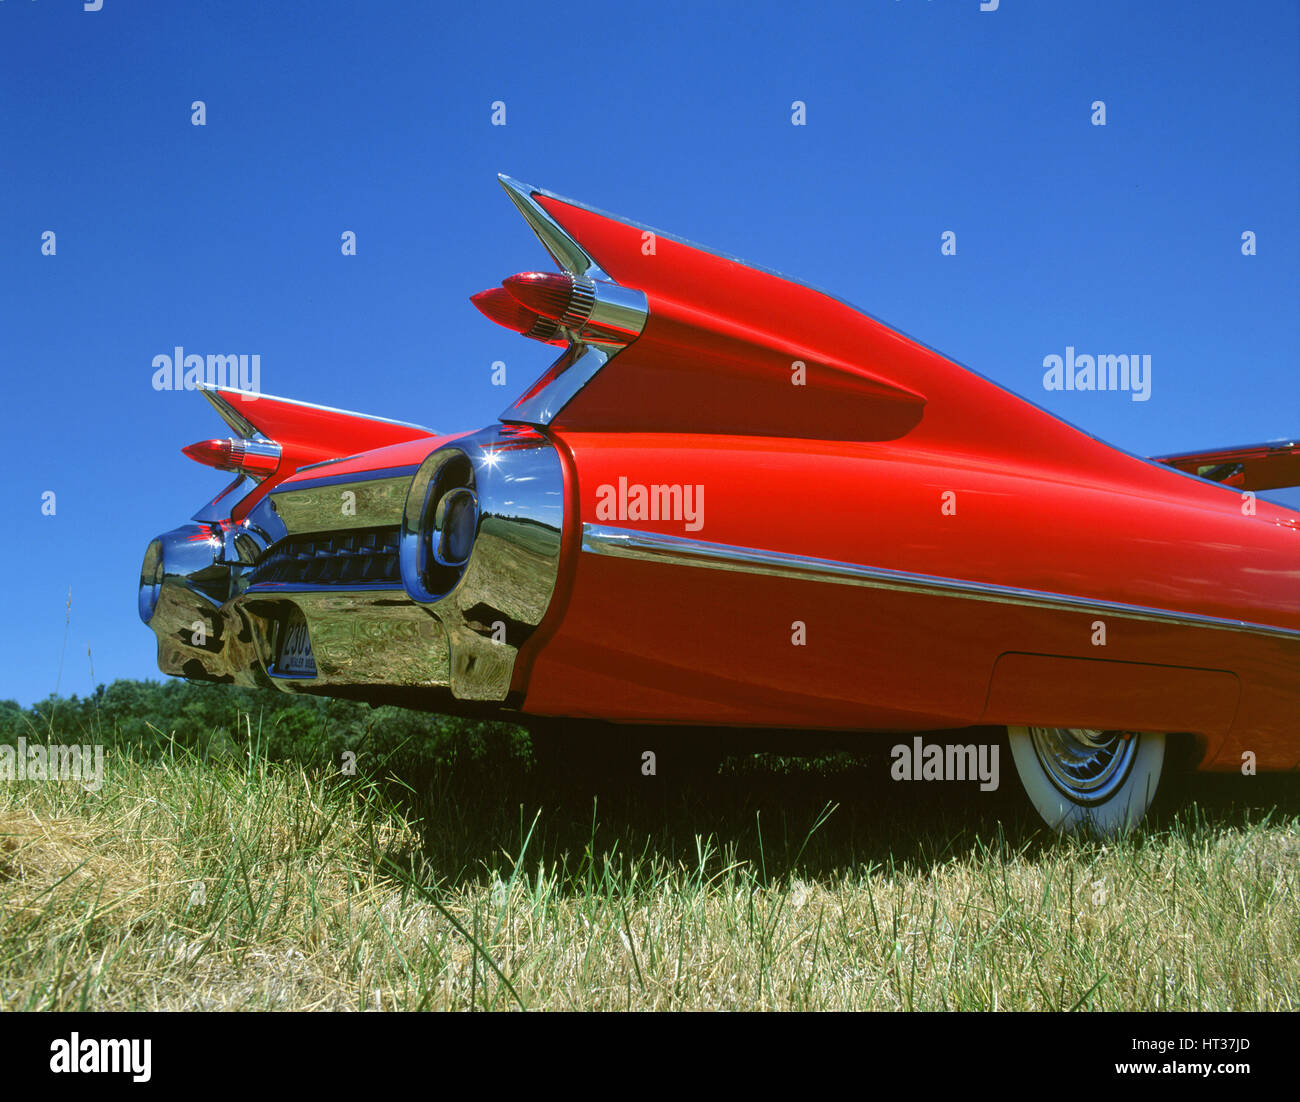 1959 Cadillac series 62 tail fins. Artist: Unknown. Stock Photo